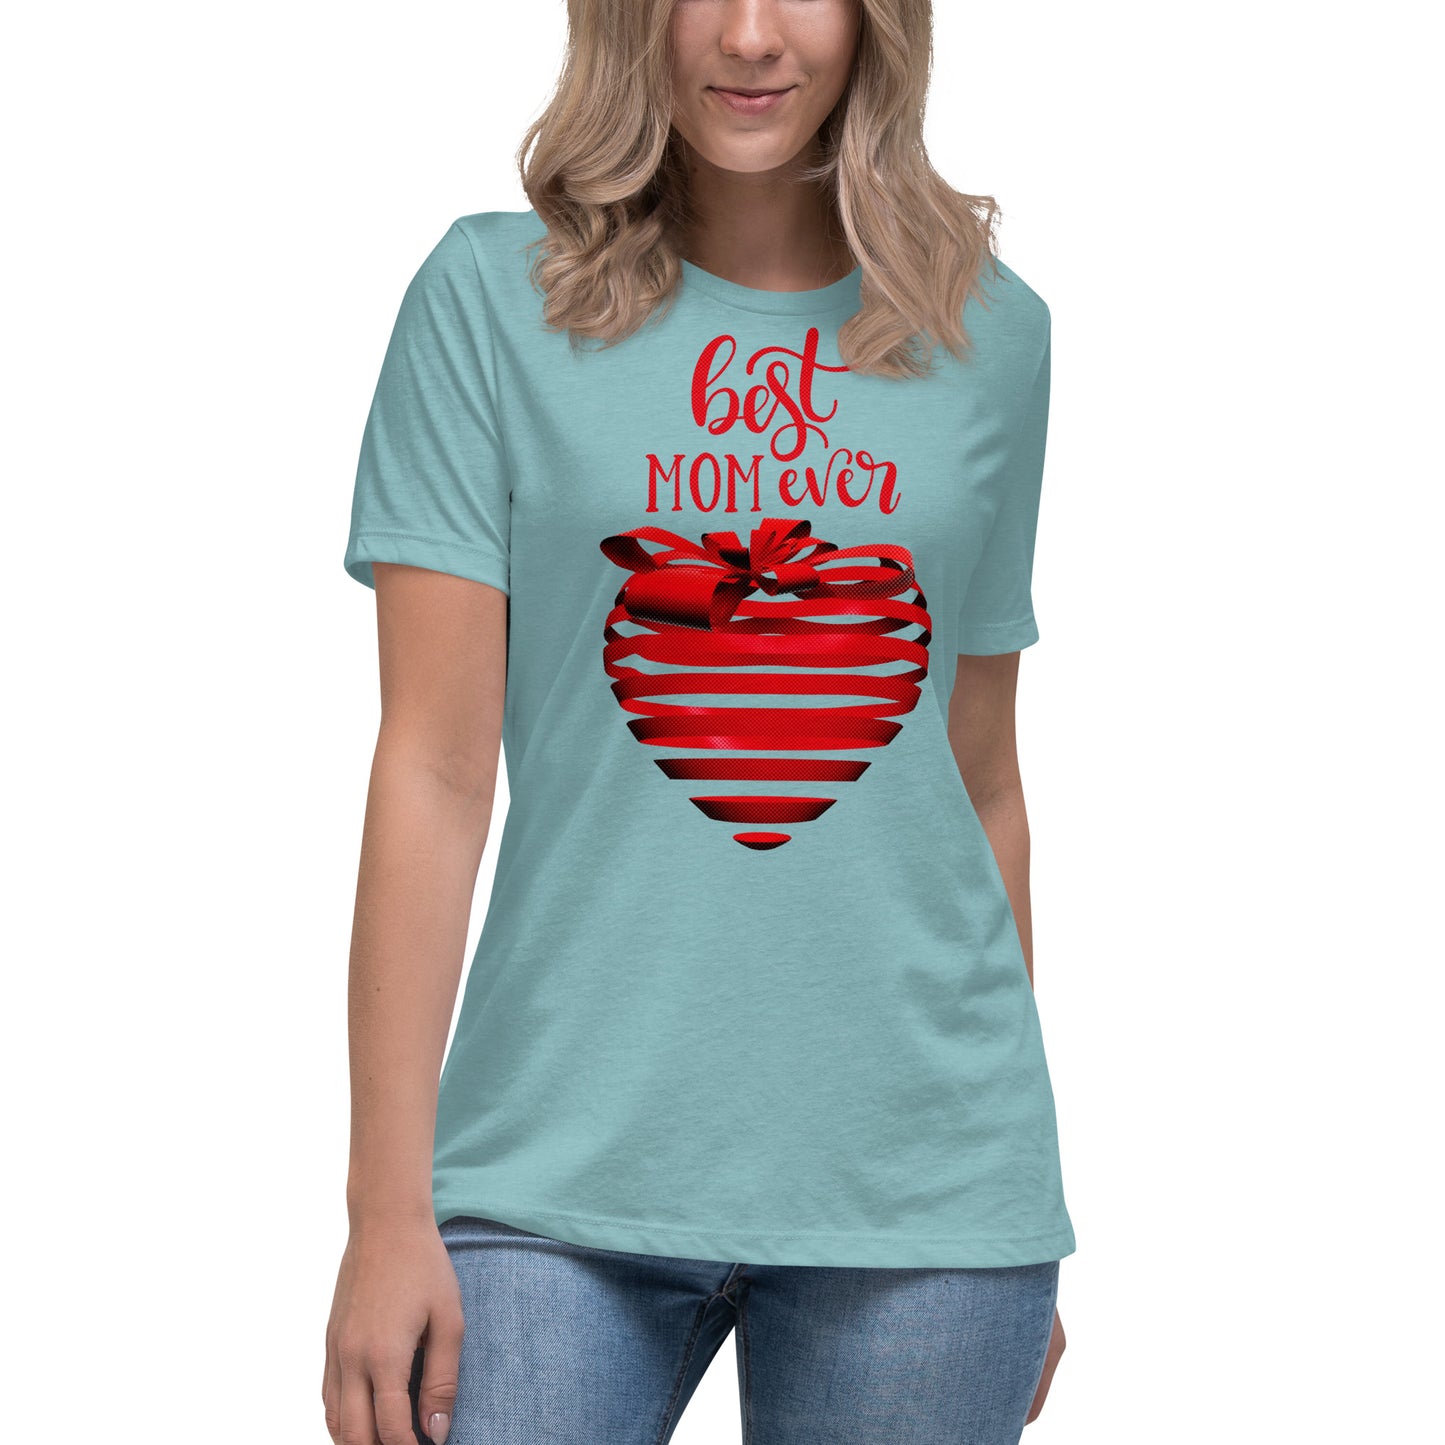 Women with blue lagoon T-shirt with red text best MOM Ever and red heart